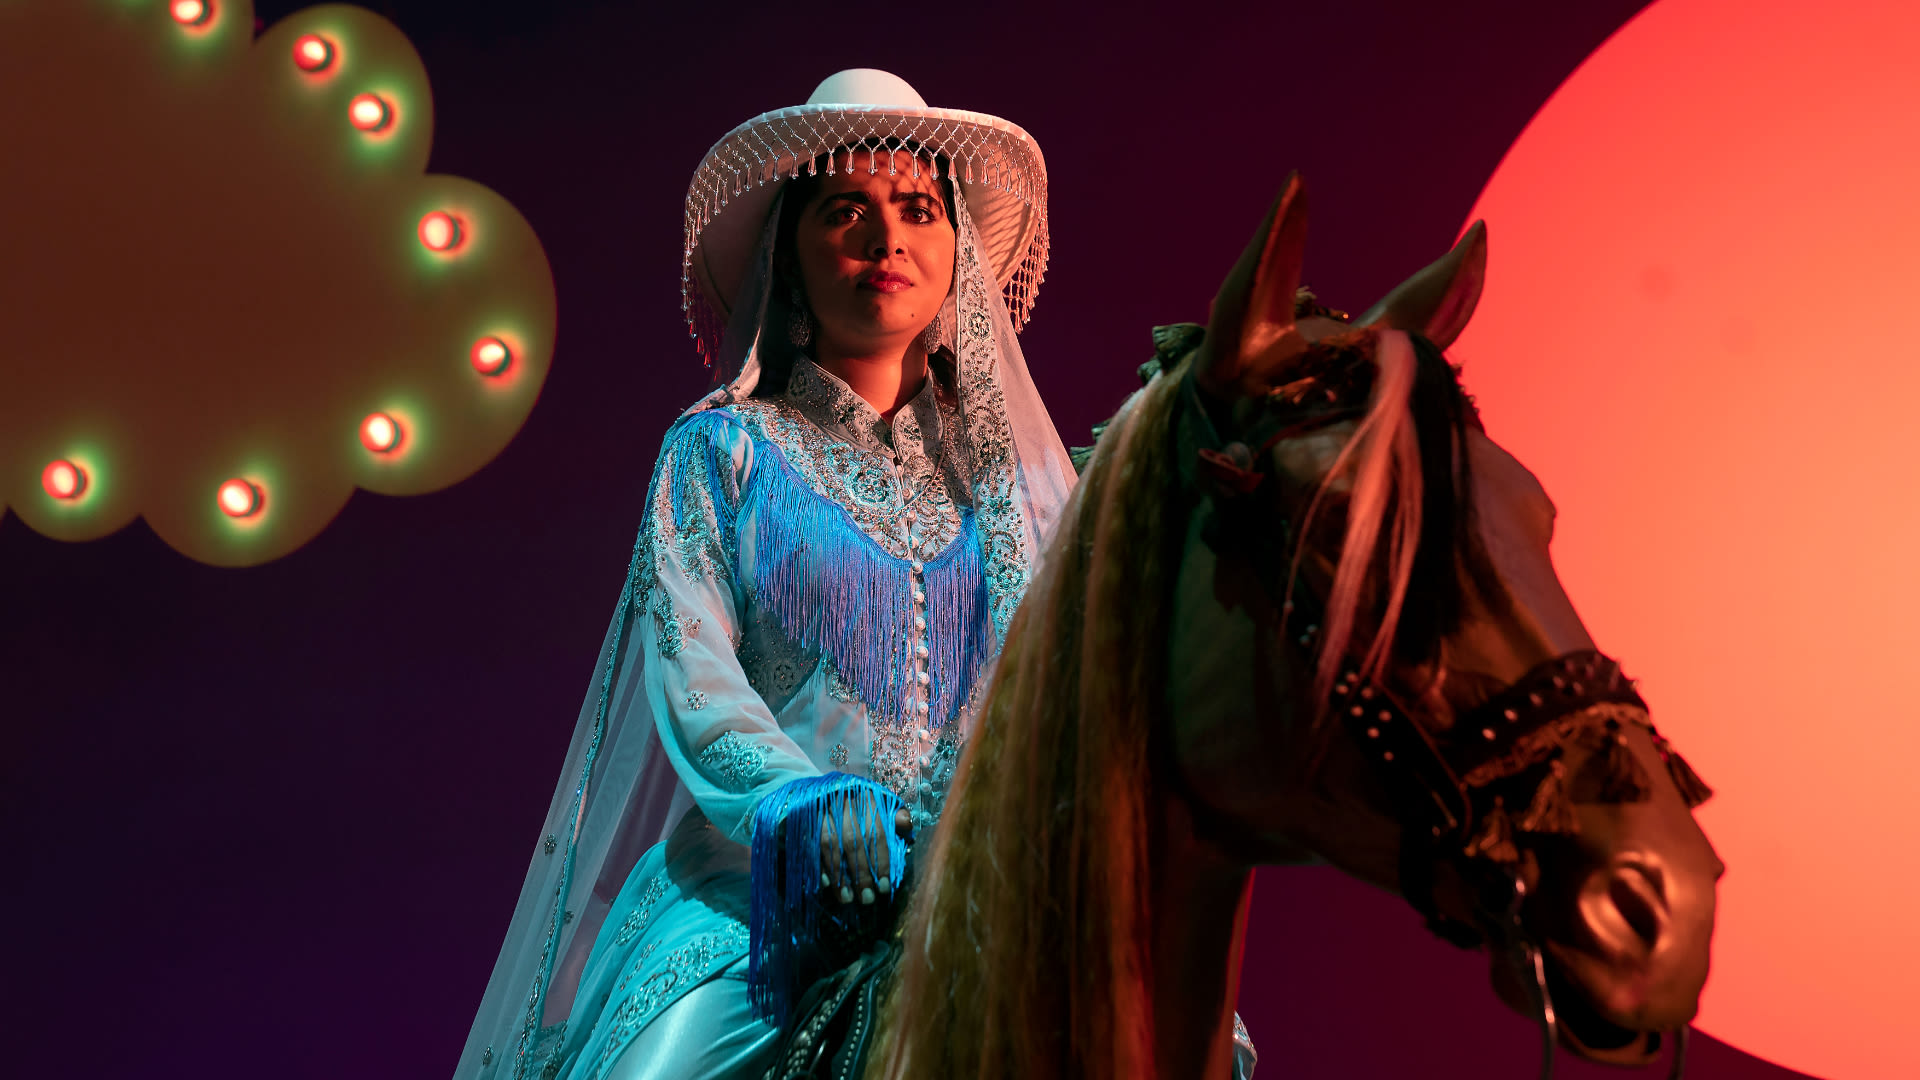 Malala Yousafzai Is Head-to-Toe Cowgirl in First Look at Her Cameo in Peacock’s ‘We Are Lady Parts’